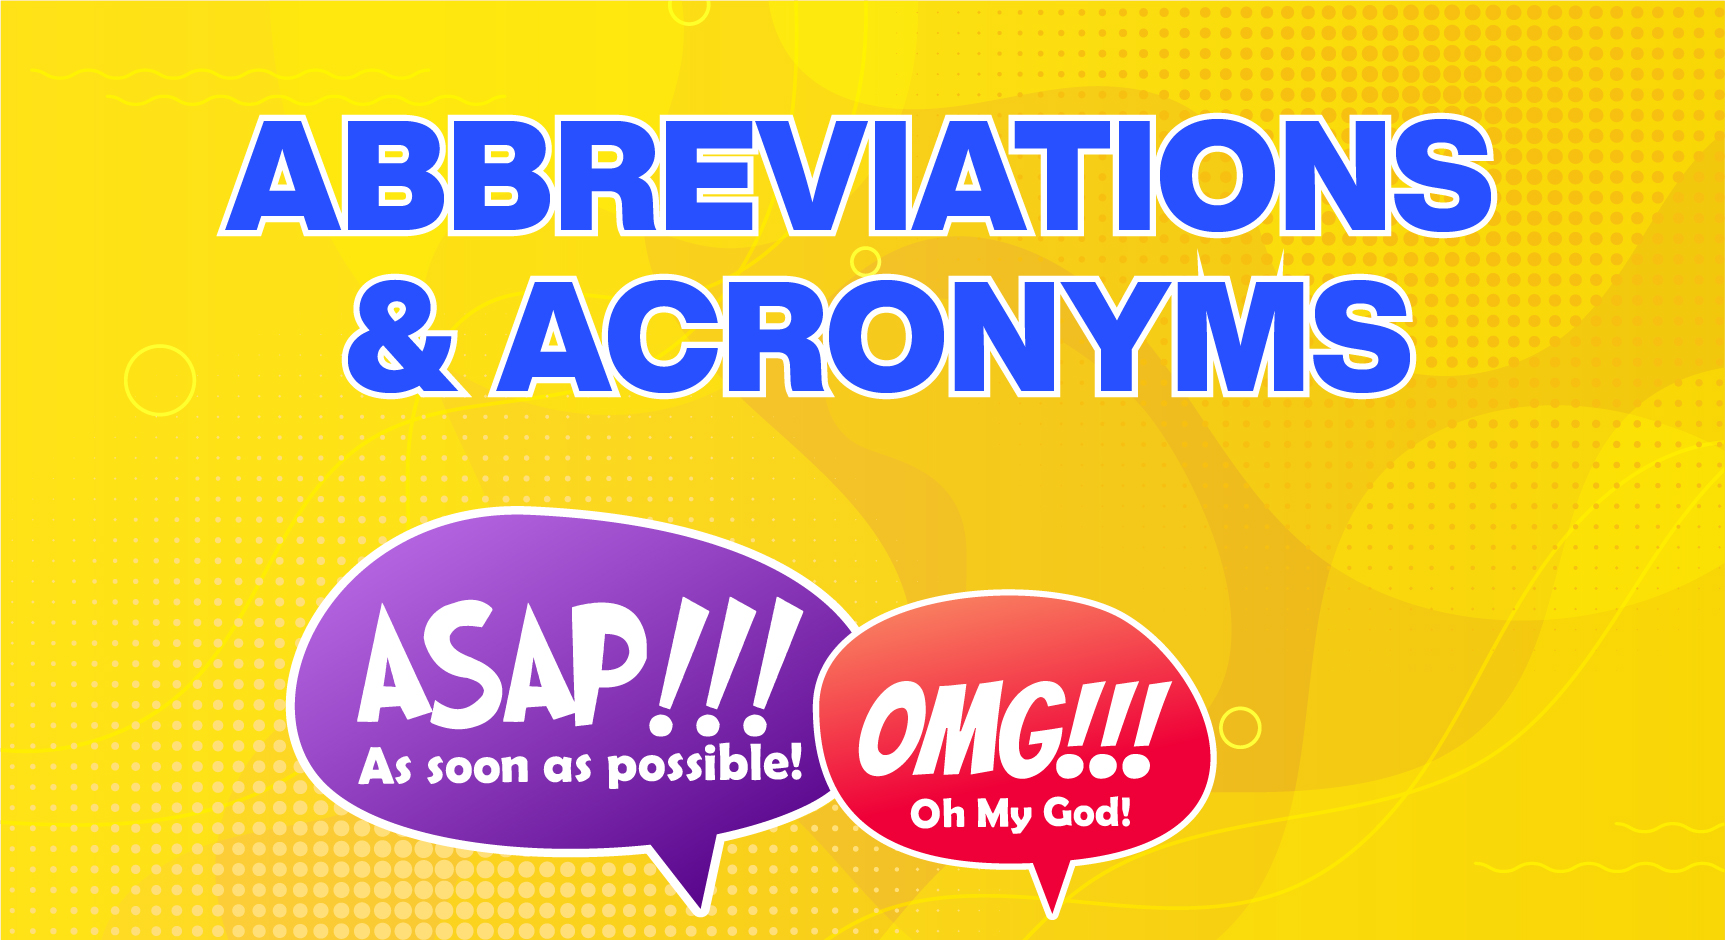 Abbreviations and Acronyms in English